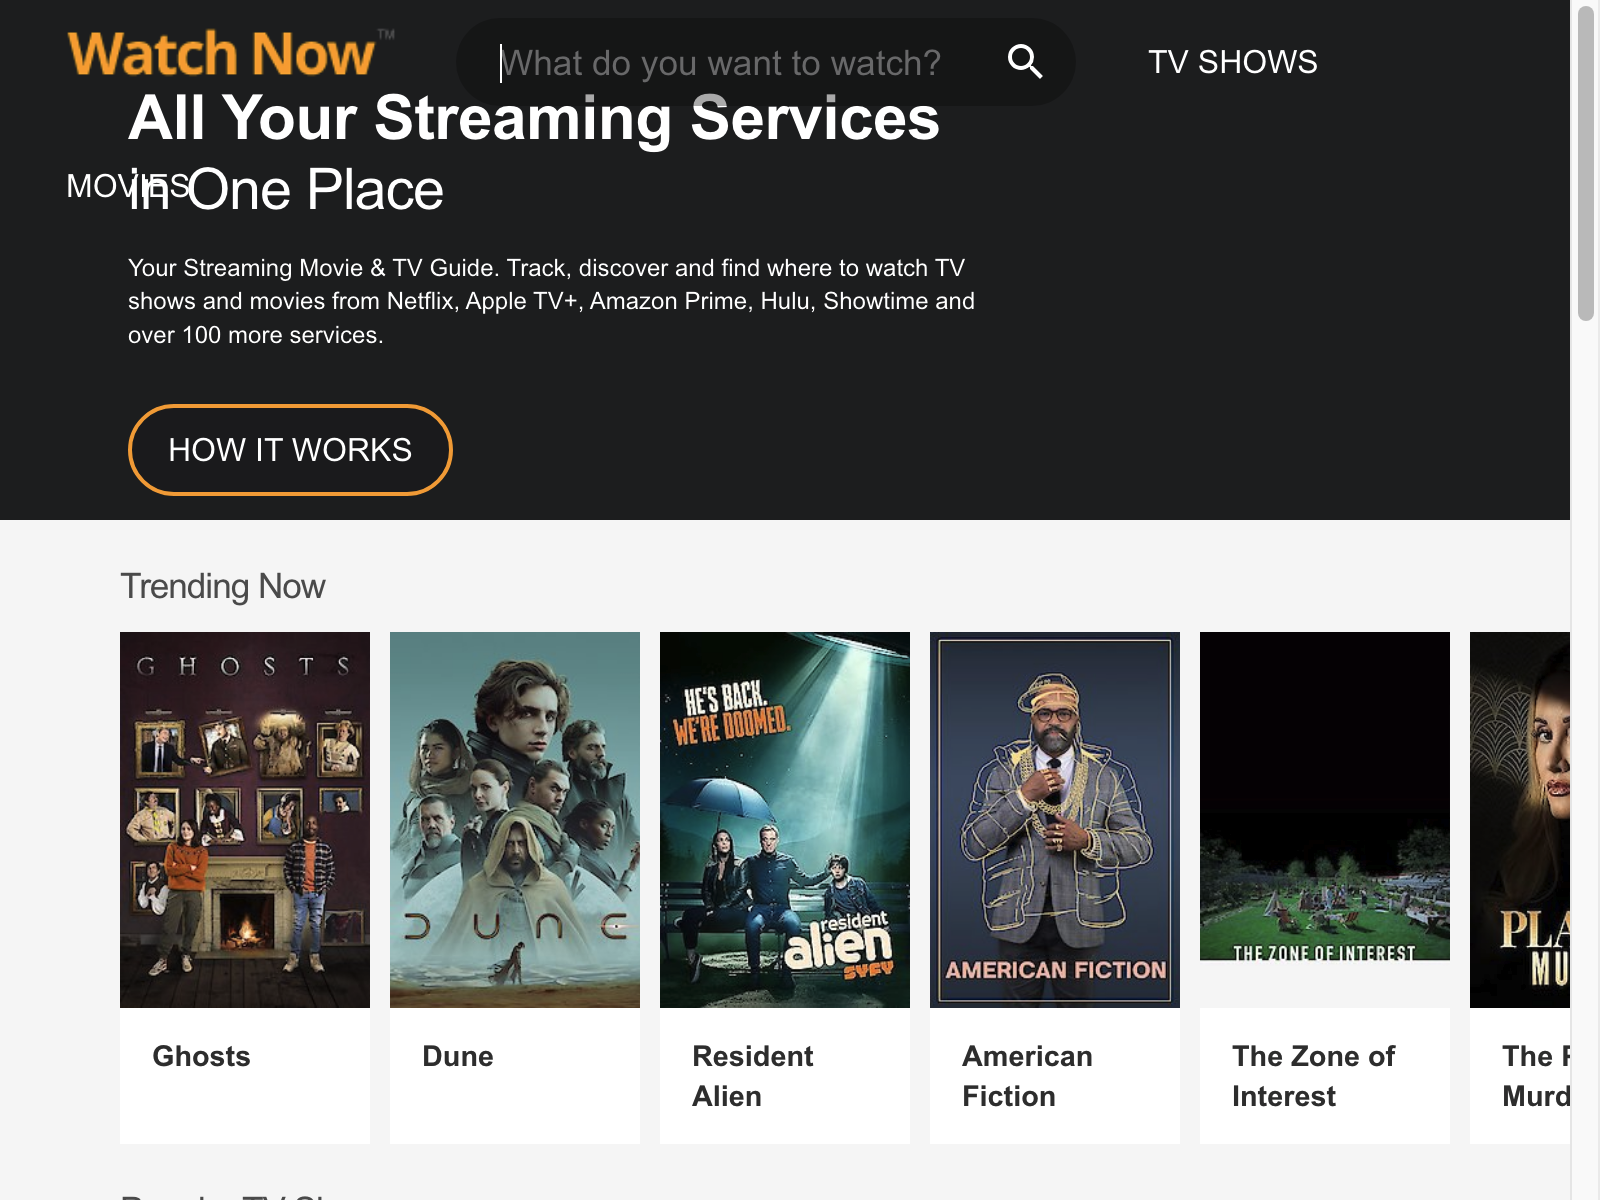 watchnow Review: Pros, Cons, Alternatives